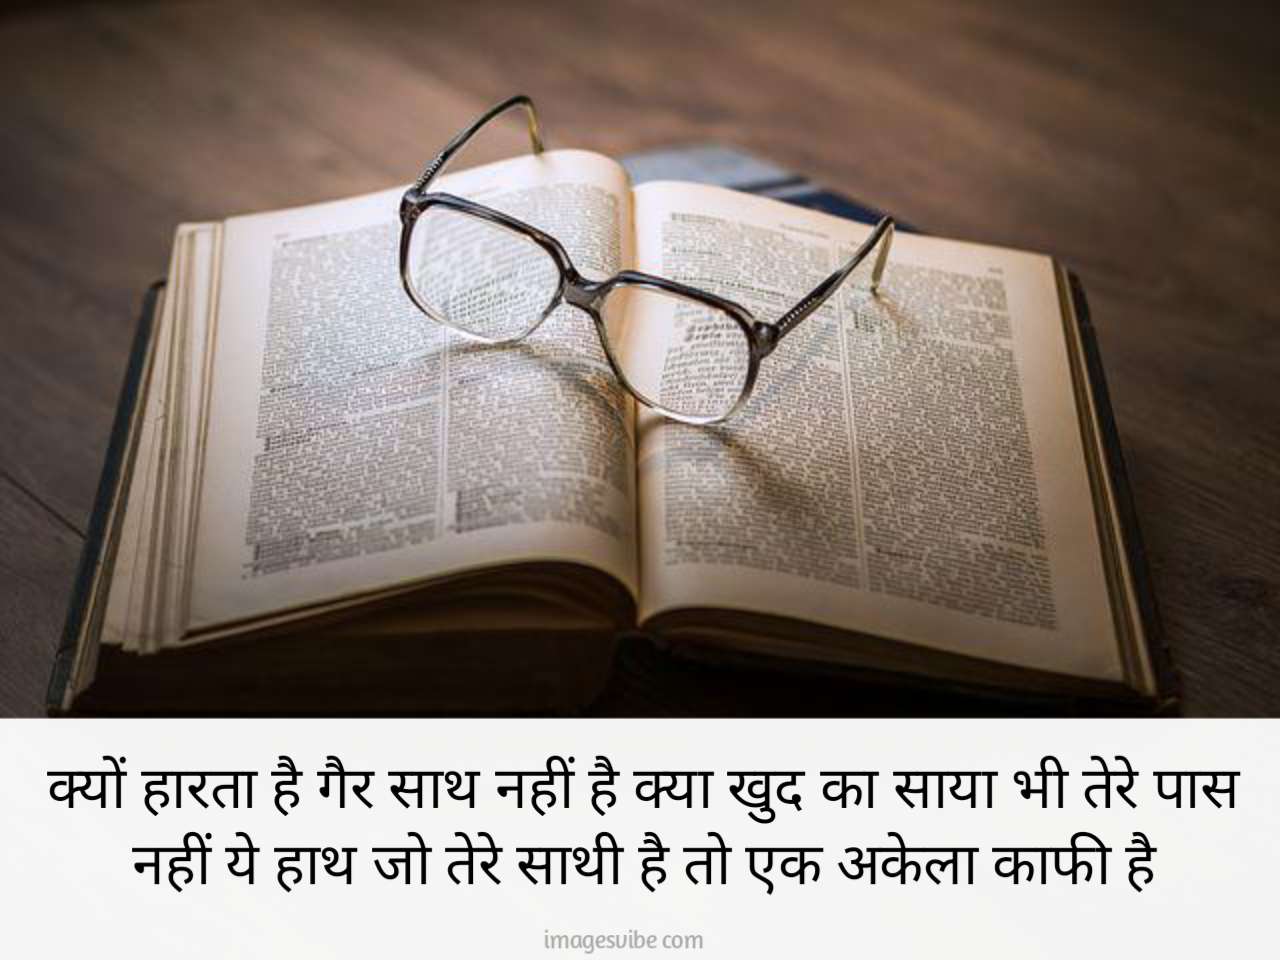 Motivational Hindi Images With Quotes13 